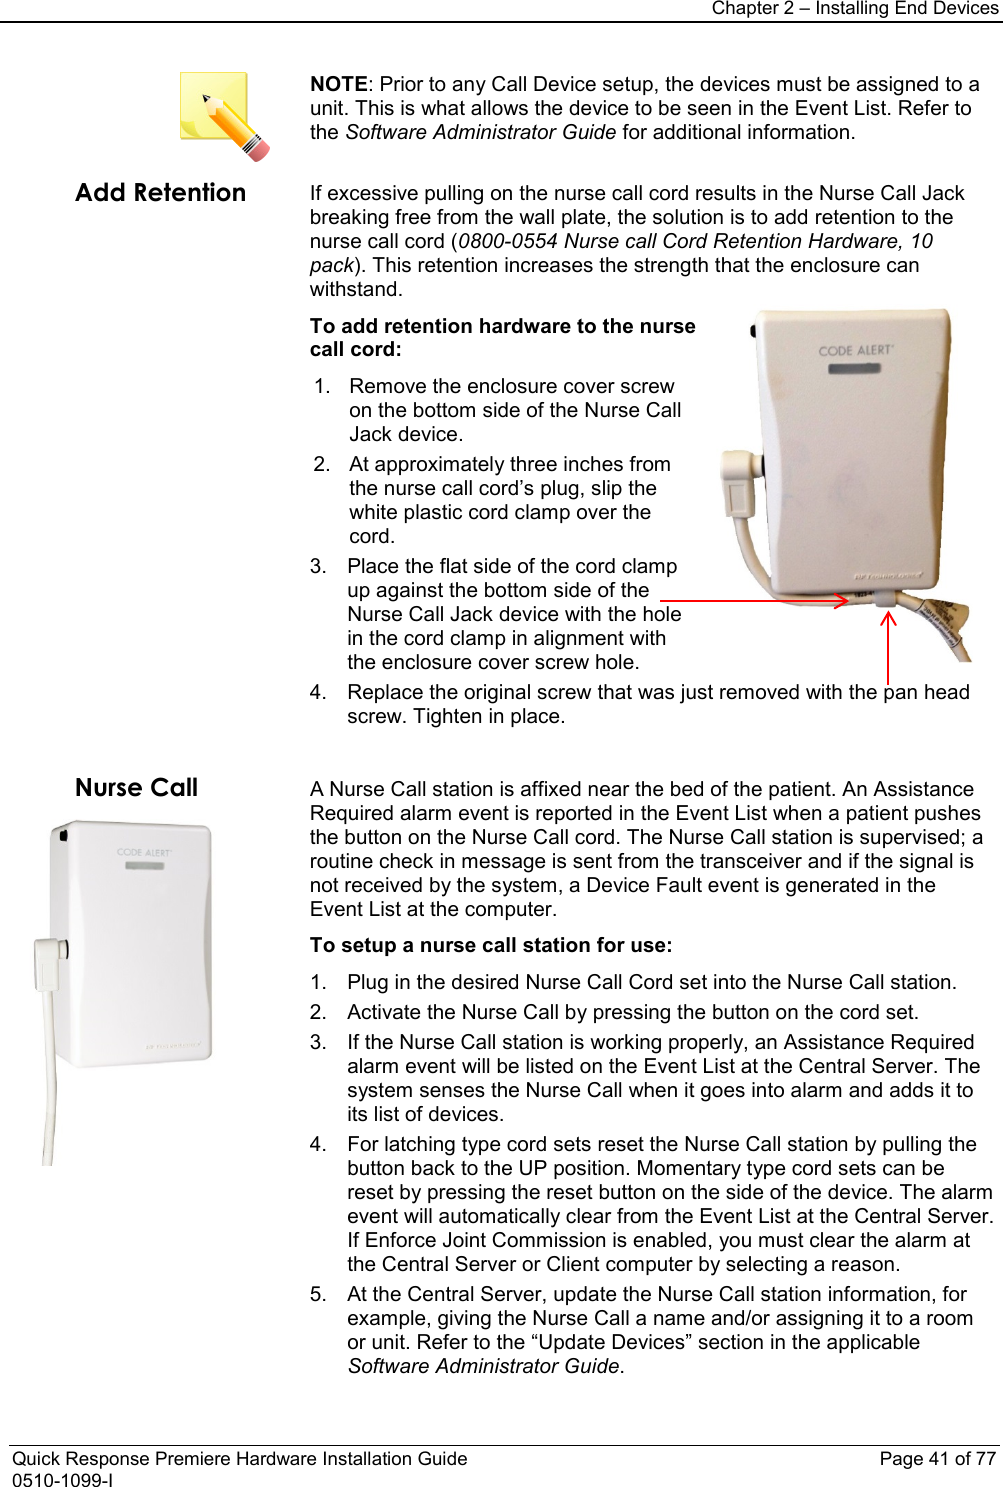 Chapter 2 – Installing End Devices  Quick Response Premiere Hardware Installation Guide    Page 41 of 77 0510-1099-I  NOTE: Prior to any Call Device setup, the devices must be assigned to a unit. This is what allows the device to be seen in the Event List. Refer to the Software Administrator Guide for additional information. Add Retention  If excessive pulling on the nurse call cord results in the Nurse Call Jack breaking free from the wall plate, the solution is to add retention to the nurse call cord (0800-0554 Nurse call Cord Retention Hardware, 10 pack). This retention increases the strength that the enclosure can withstand. To add retention hardware to the nurse call cord: 1. Remove the enclosure cover screw on the bottom side of the Nurse Call Jack device. 2. At approximately three inches from the nurse call cord’s plug, slip the white plastic cord clamp over the cord. 3. Place the flat side of the cord clamp up against the bottom side of the Nurse Call Jack device with the hole in the cord clamp in alignment with the enclosure cover screw hole. 4. Replace the original screw that was just removed with the pan head screw. Tighten in place.  Nurse Call  A Nurse Call station is affixed near the bed of the patient. An Assistance Required alarm event is reported in the Event List when a patient pushes the button on the Nurse Call cord. The Nurse Call station is supervised; a routine check in message is sent from the transceiver and if the signal is not received by the system, a Device Fault event is generated in the Event List at the computer. To setup a nurse call station for use: 1. Plug in the desired Nurse Call Cord set into the Nurse Call station. 2. Activate the Nurse Call by pressing the button on the cord set. 3. If the Nurse Call station is working properly, an Assistance Required alarm event will be listed on the Event List at the Central Server. The system senses the Nurse Call when it goes into alarm and adds it to its list of devices. 4. For latching type cord sets reset the Nurse Call station by pulling the button back to the UP position. Momentary type cord sets can be reset by pressing the reset button on the side of the device. The alarm event will automatically clear from the Event List at the Central Server. If Enforce Joint Commission is enabled, you must clear the alarm at the Central Server or Client computer by selecting a reason. 5. At the Central Server, update the Nurse Call station information, for example, giving the Nurse Call a name and/or assigning it to a room or unit. Refer to the “Update Devices” section in the applicable Software Administrator Guide. 